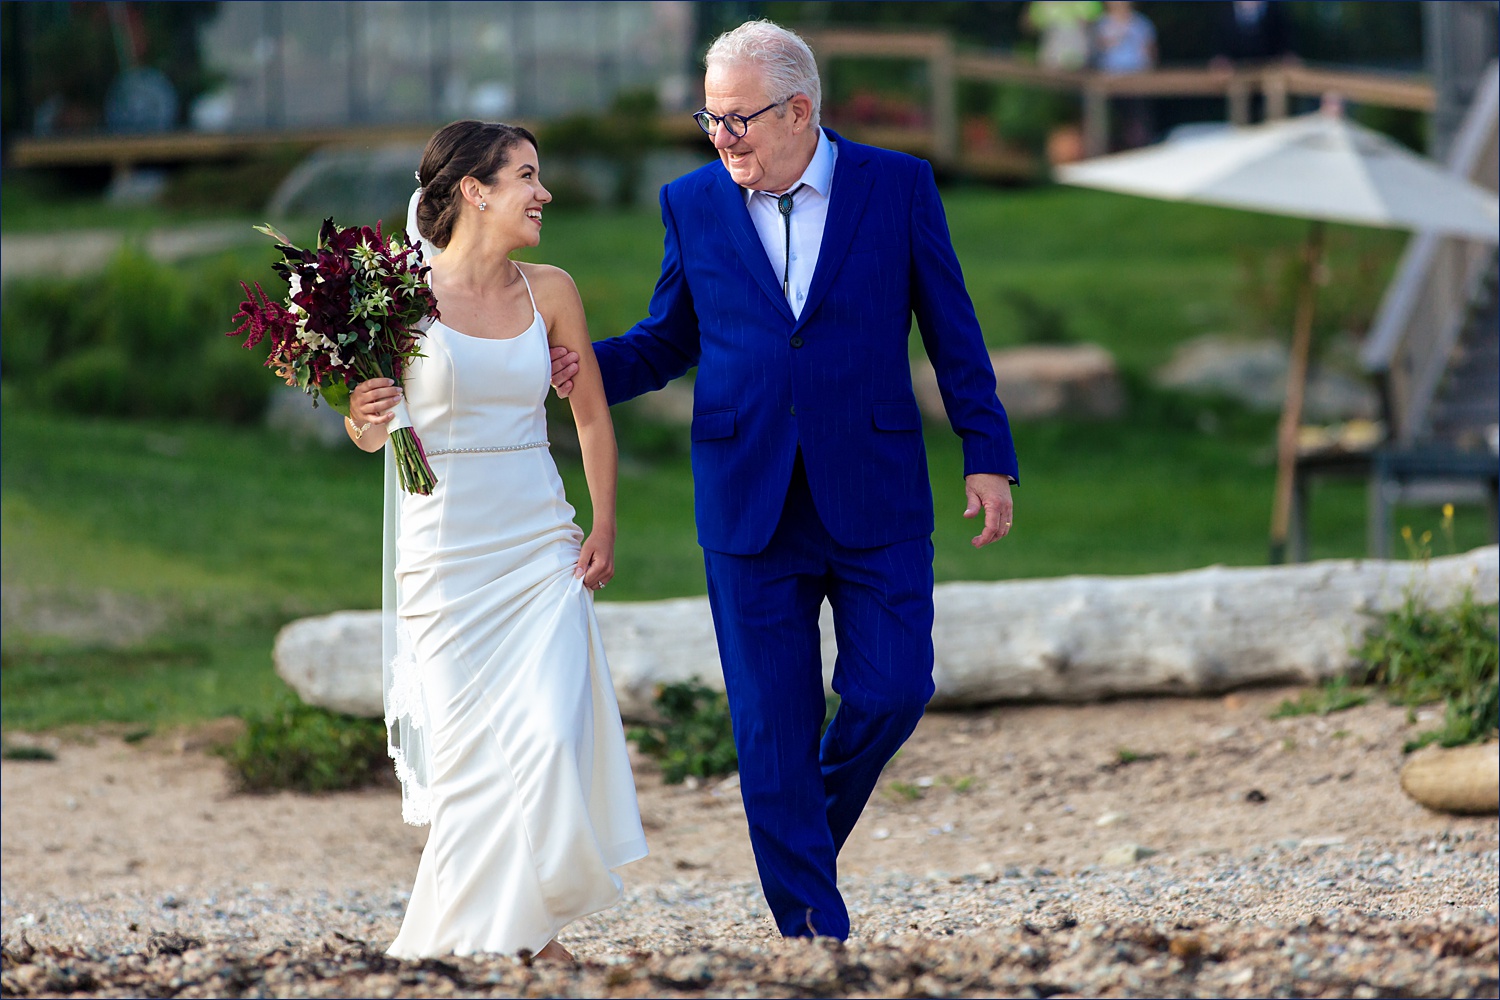 The bride and her father walk down the aisle together barefoot for the beach wedding at Aragosta